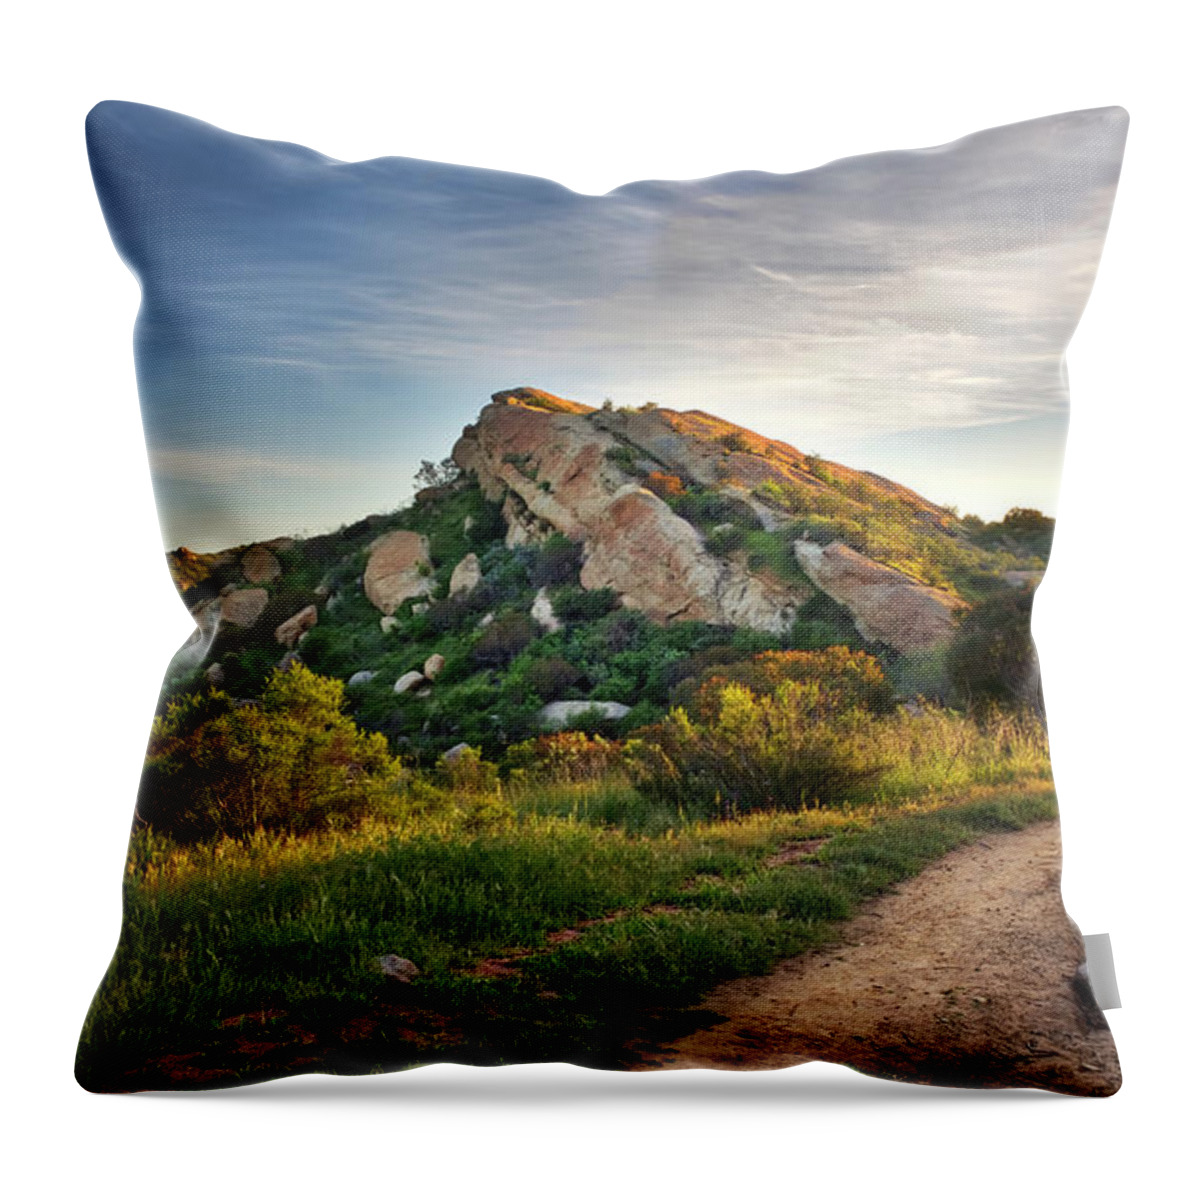 Big Rock Throw Pillow featuring the photograph Big Rock by Endre Balogh